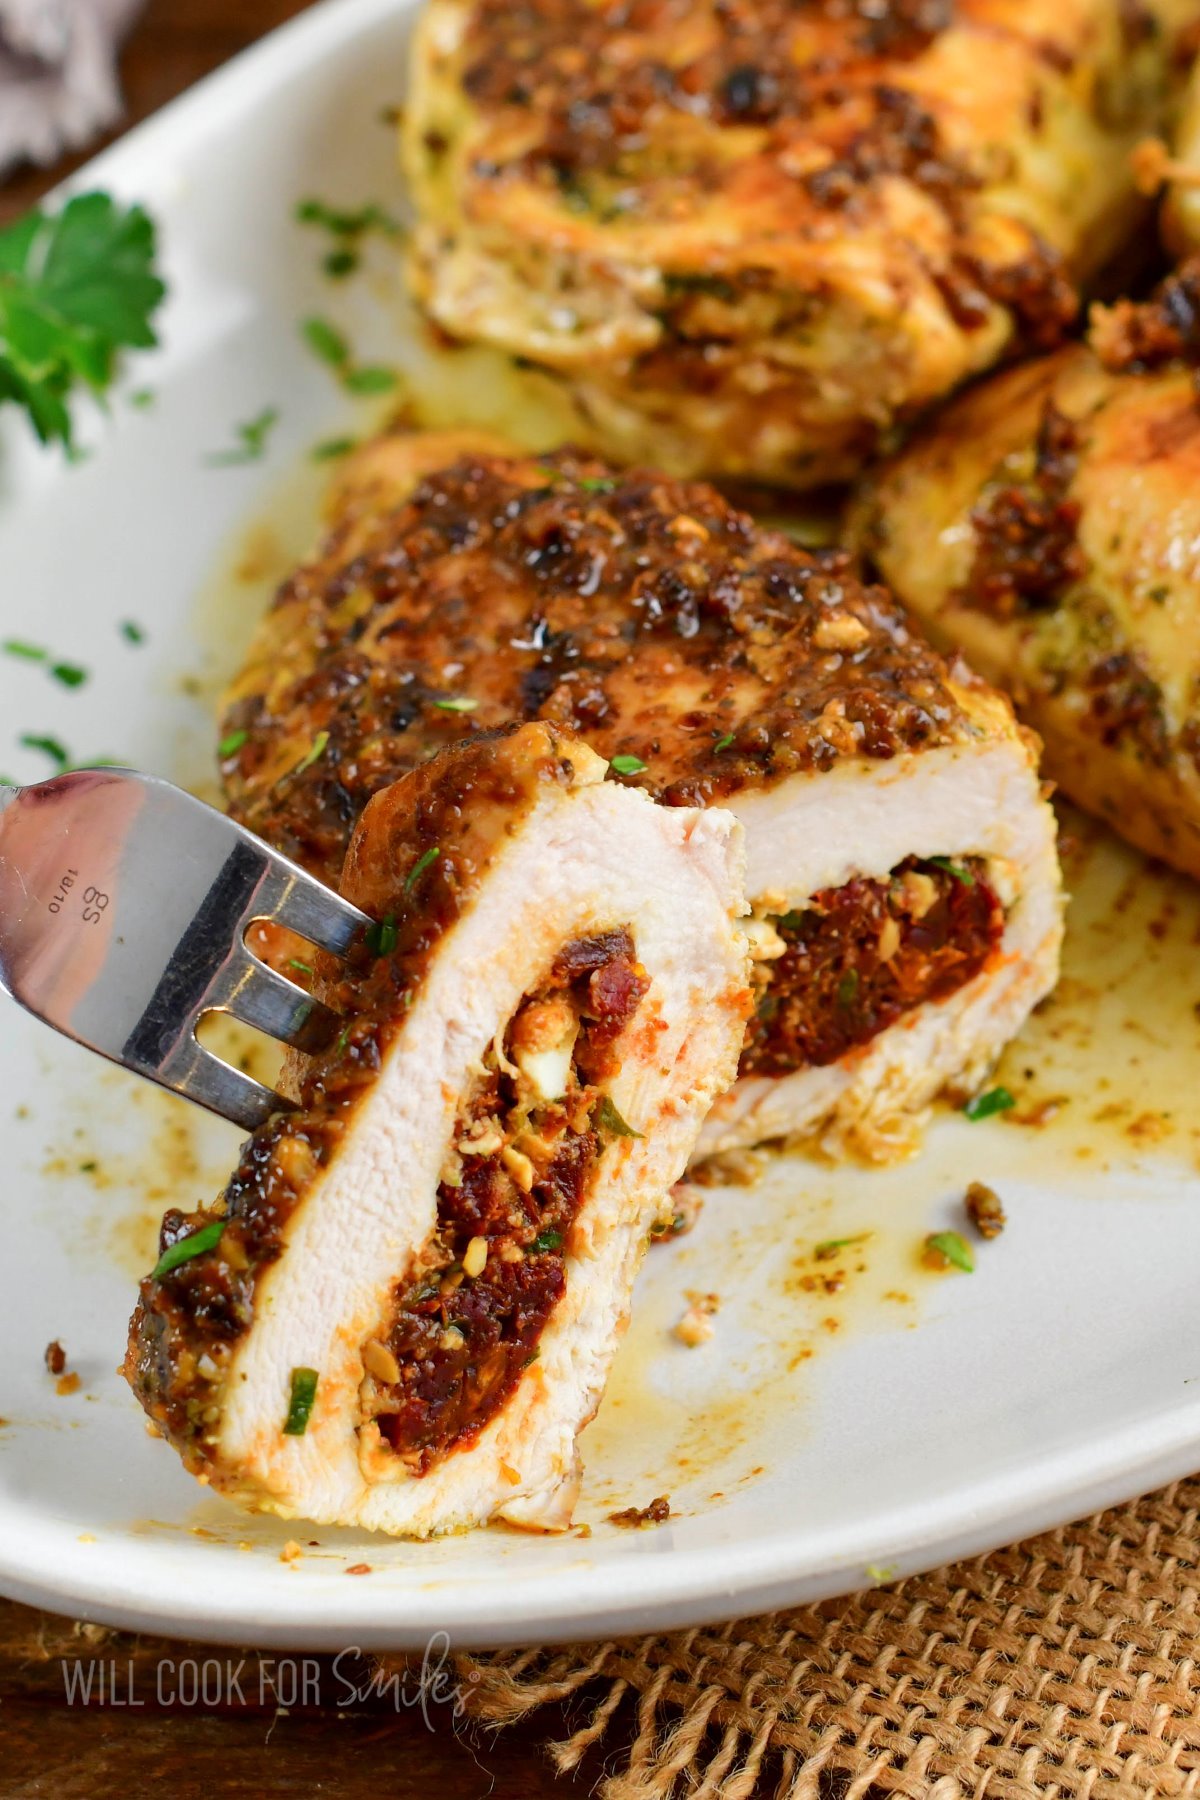 cutting into a stuffed chicken breast and view inside.